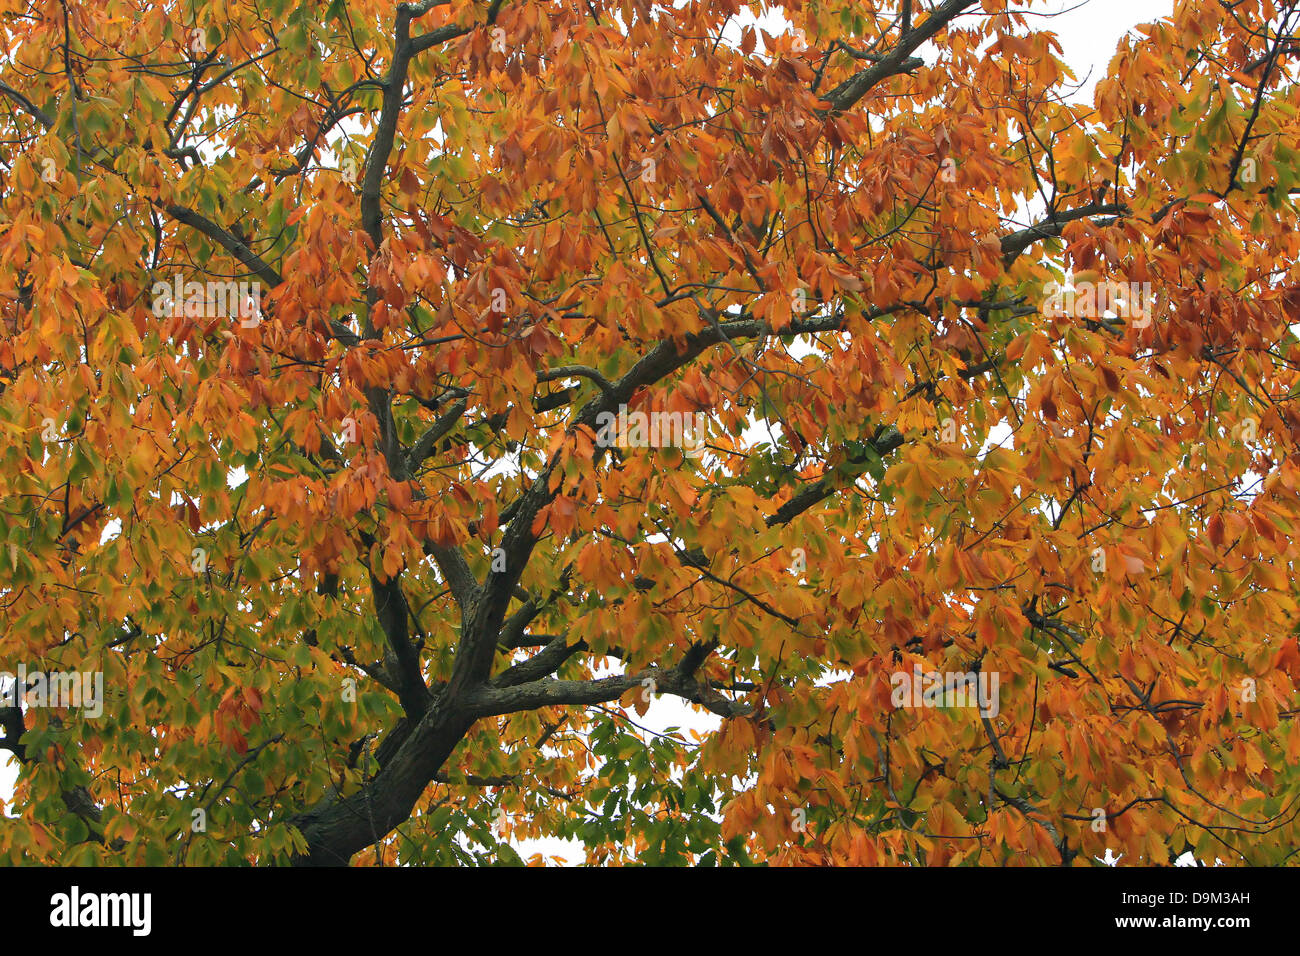 oak tree branch with fall autumn orange brown green leaves Stock Photo